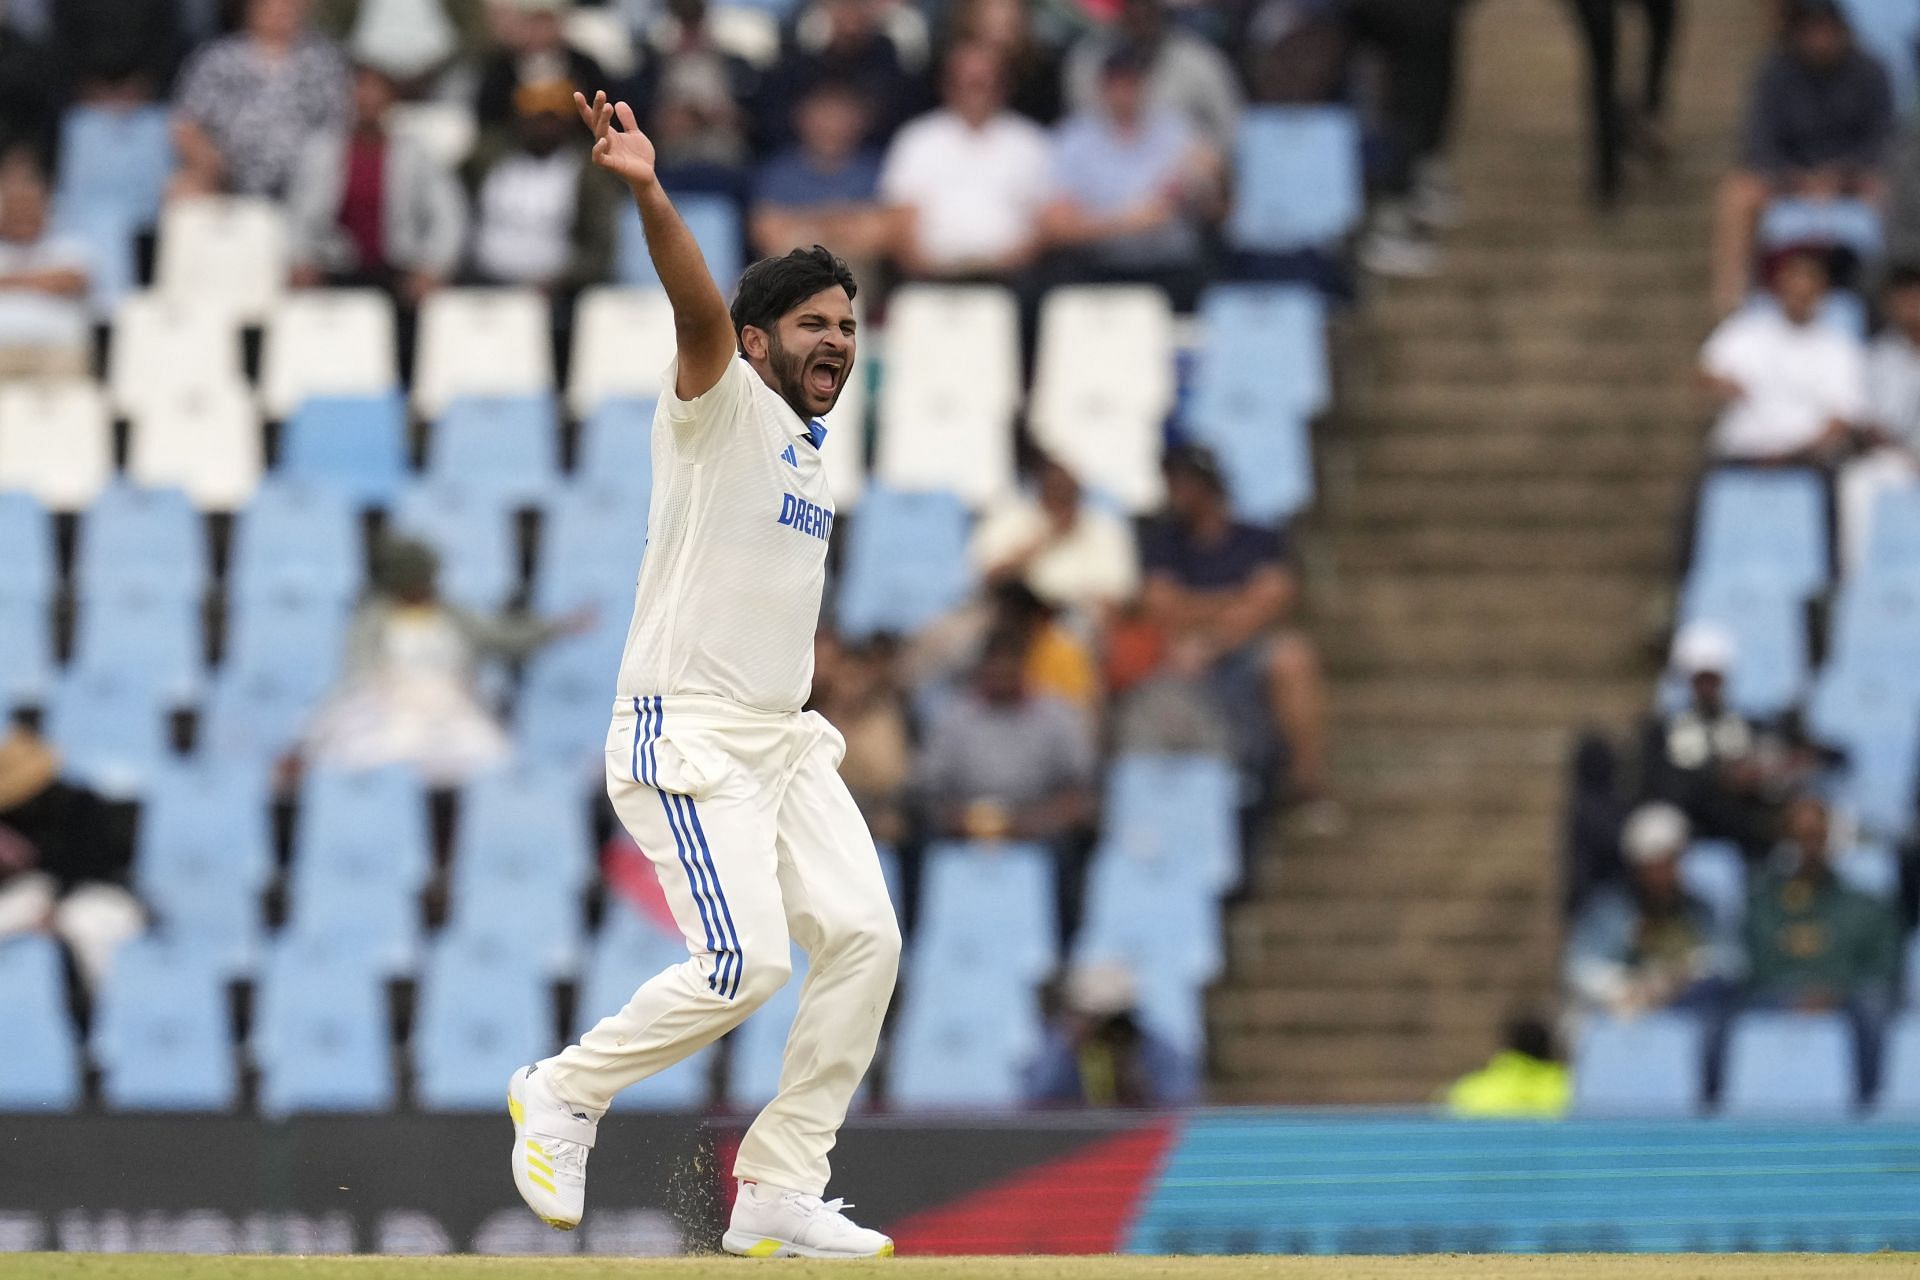 Shardul Thakur disappointed as the third seamer